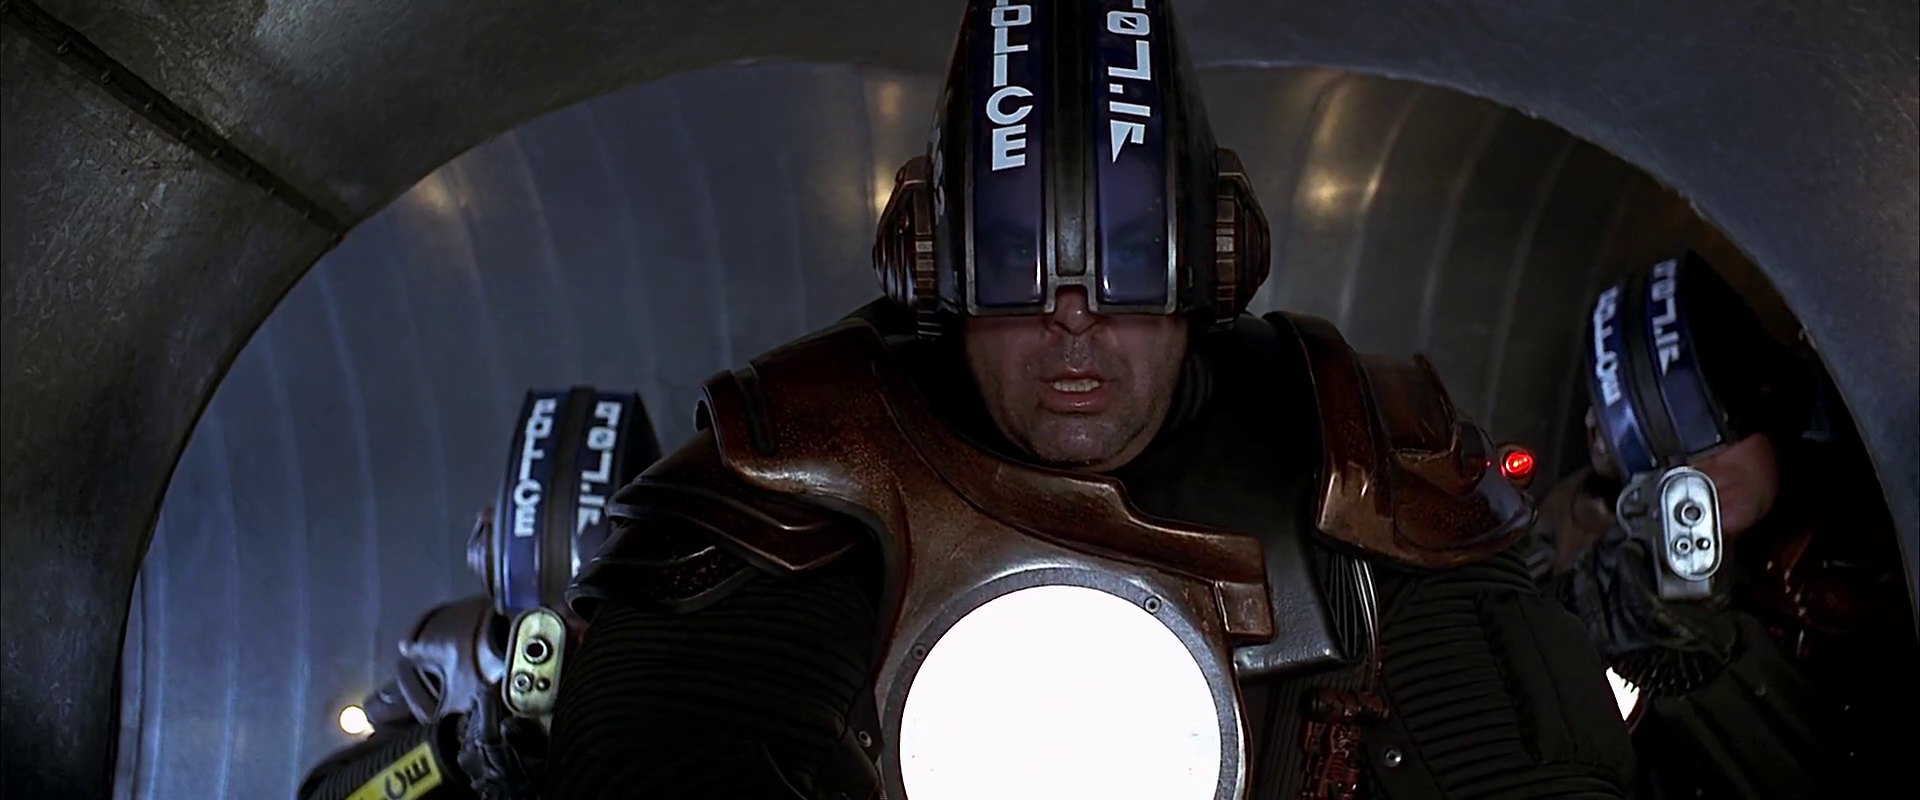 thefifthelement-police-003.png